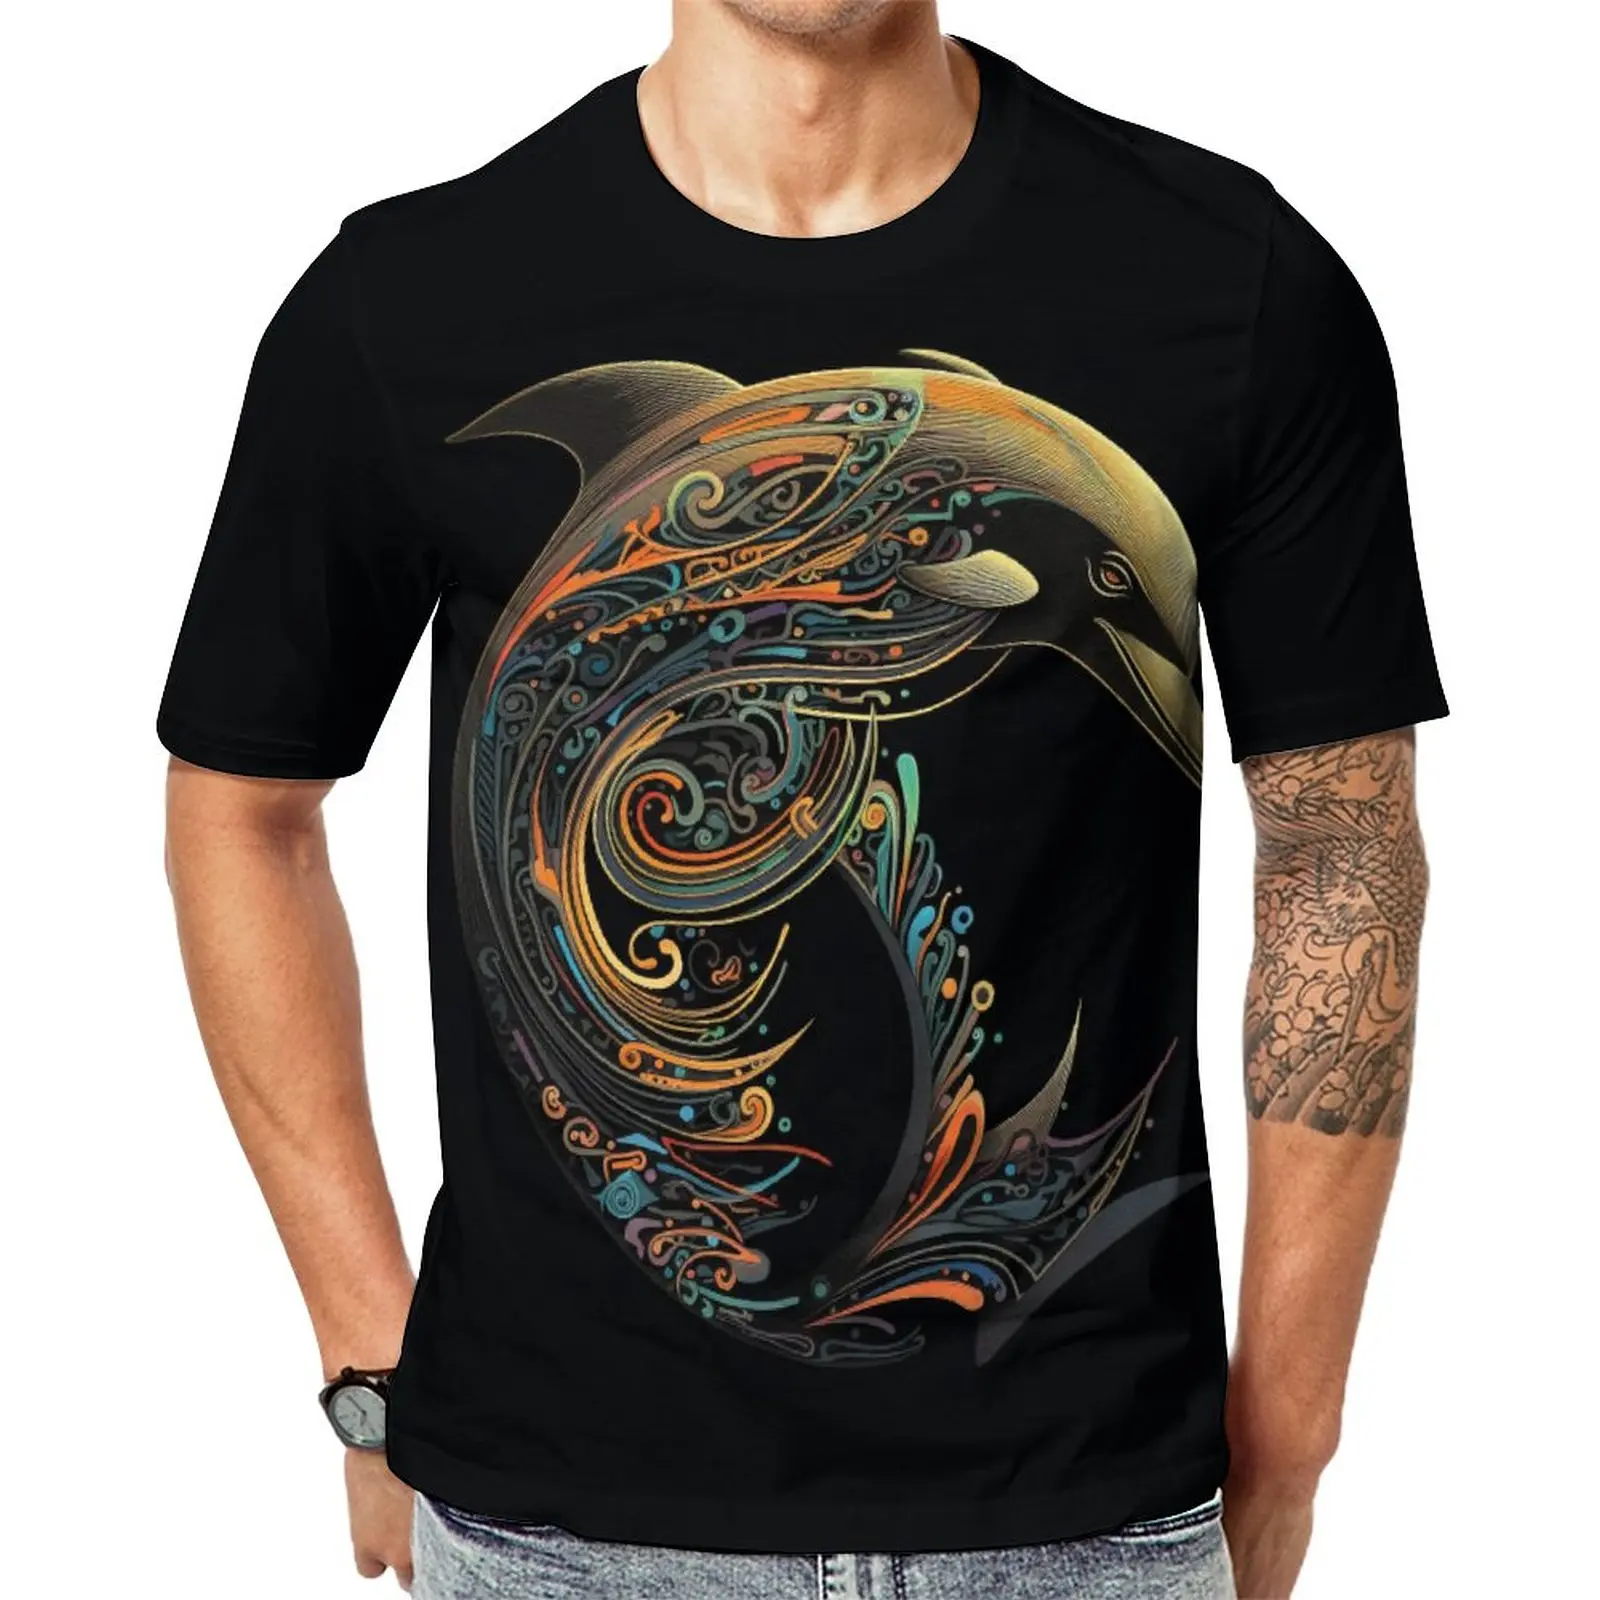 

Dolphin T-Shirt Intricate Lines Religious Art Harajuku T-Shirts Beach Graphic Tee Shirt Short-Sleeved Casual Oversized Clothing